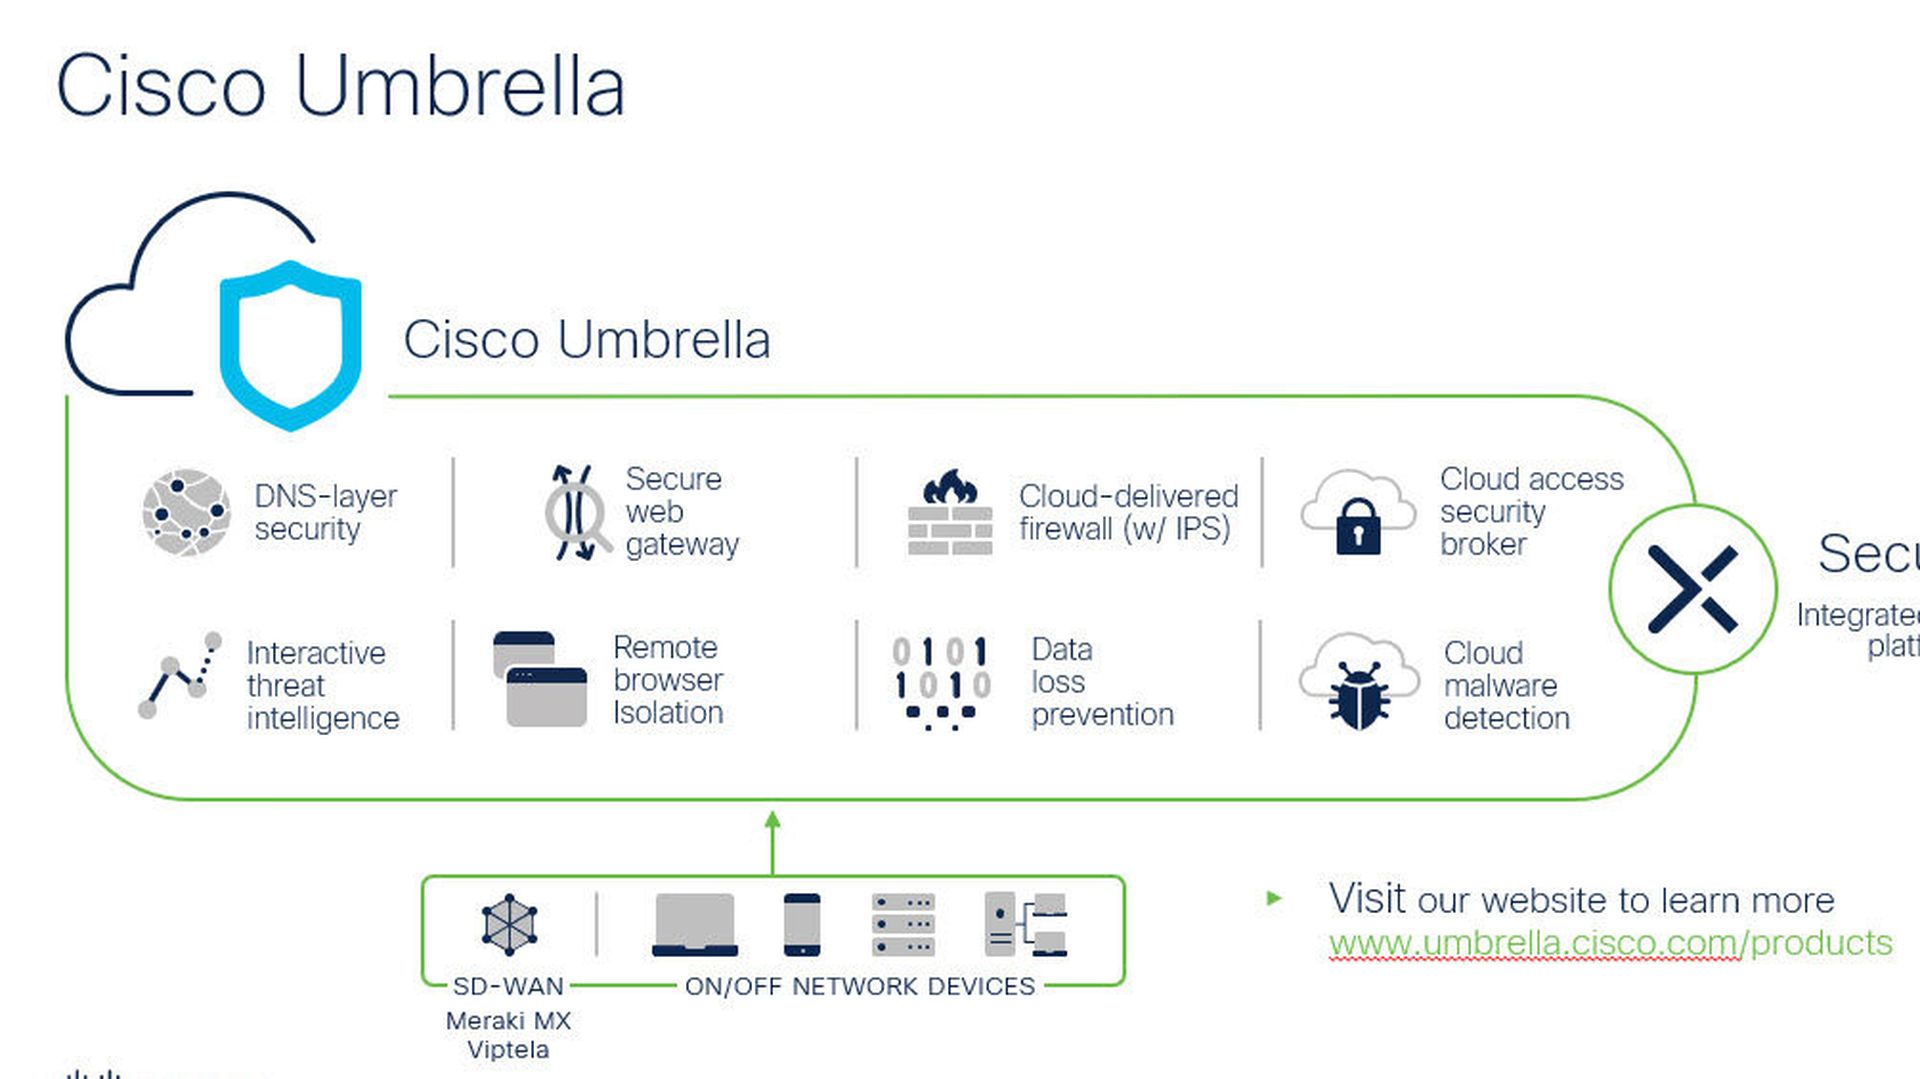 Cisco Umbrella helps cost-effectively reduce malware, streamlining IT management, and simplifying the security environment.